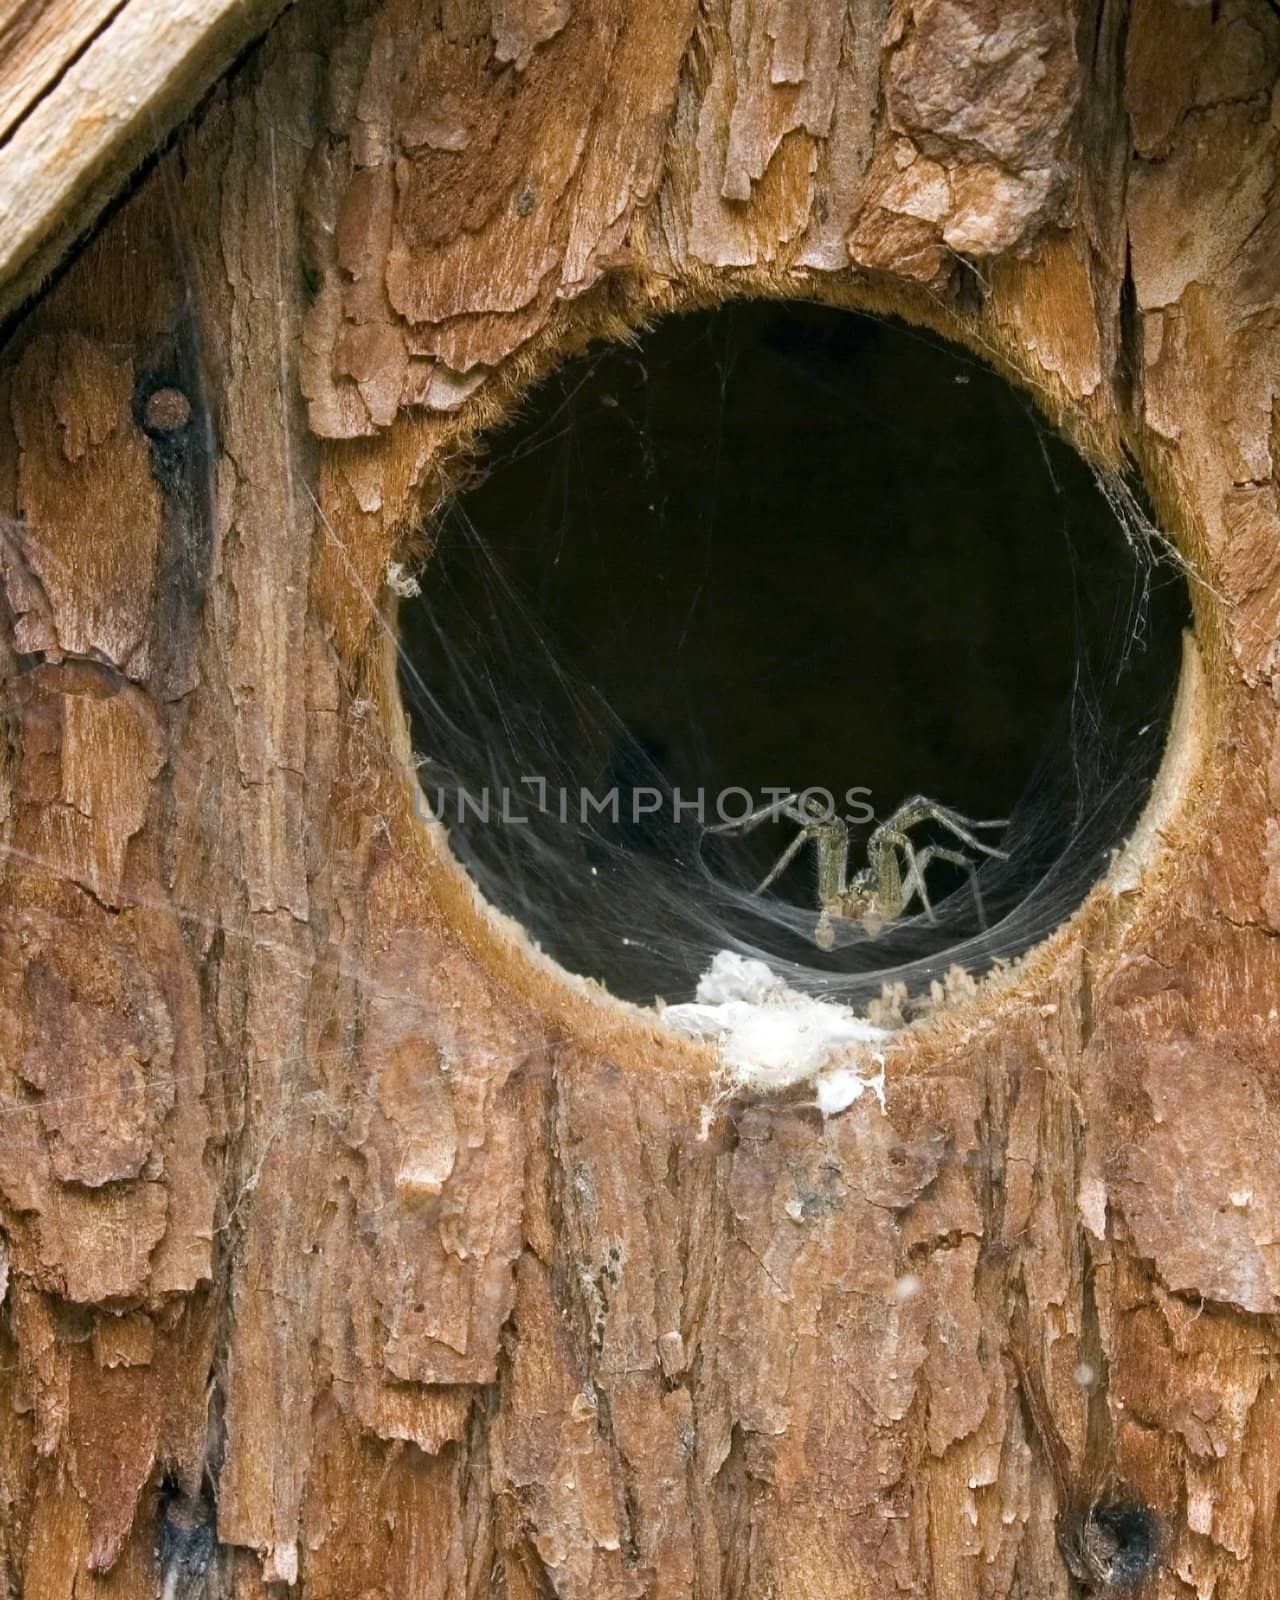 Spider In A Birdhouse by brm1949